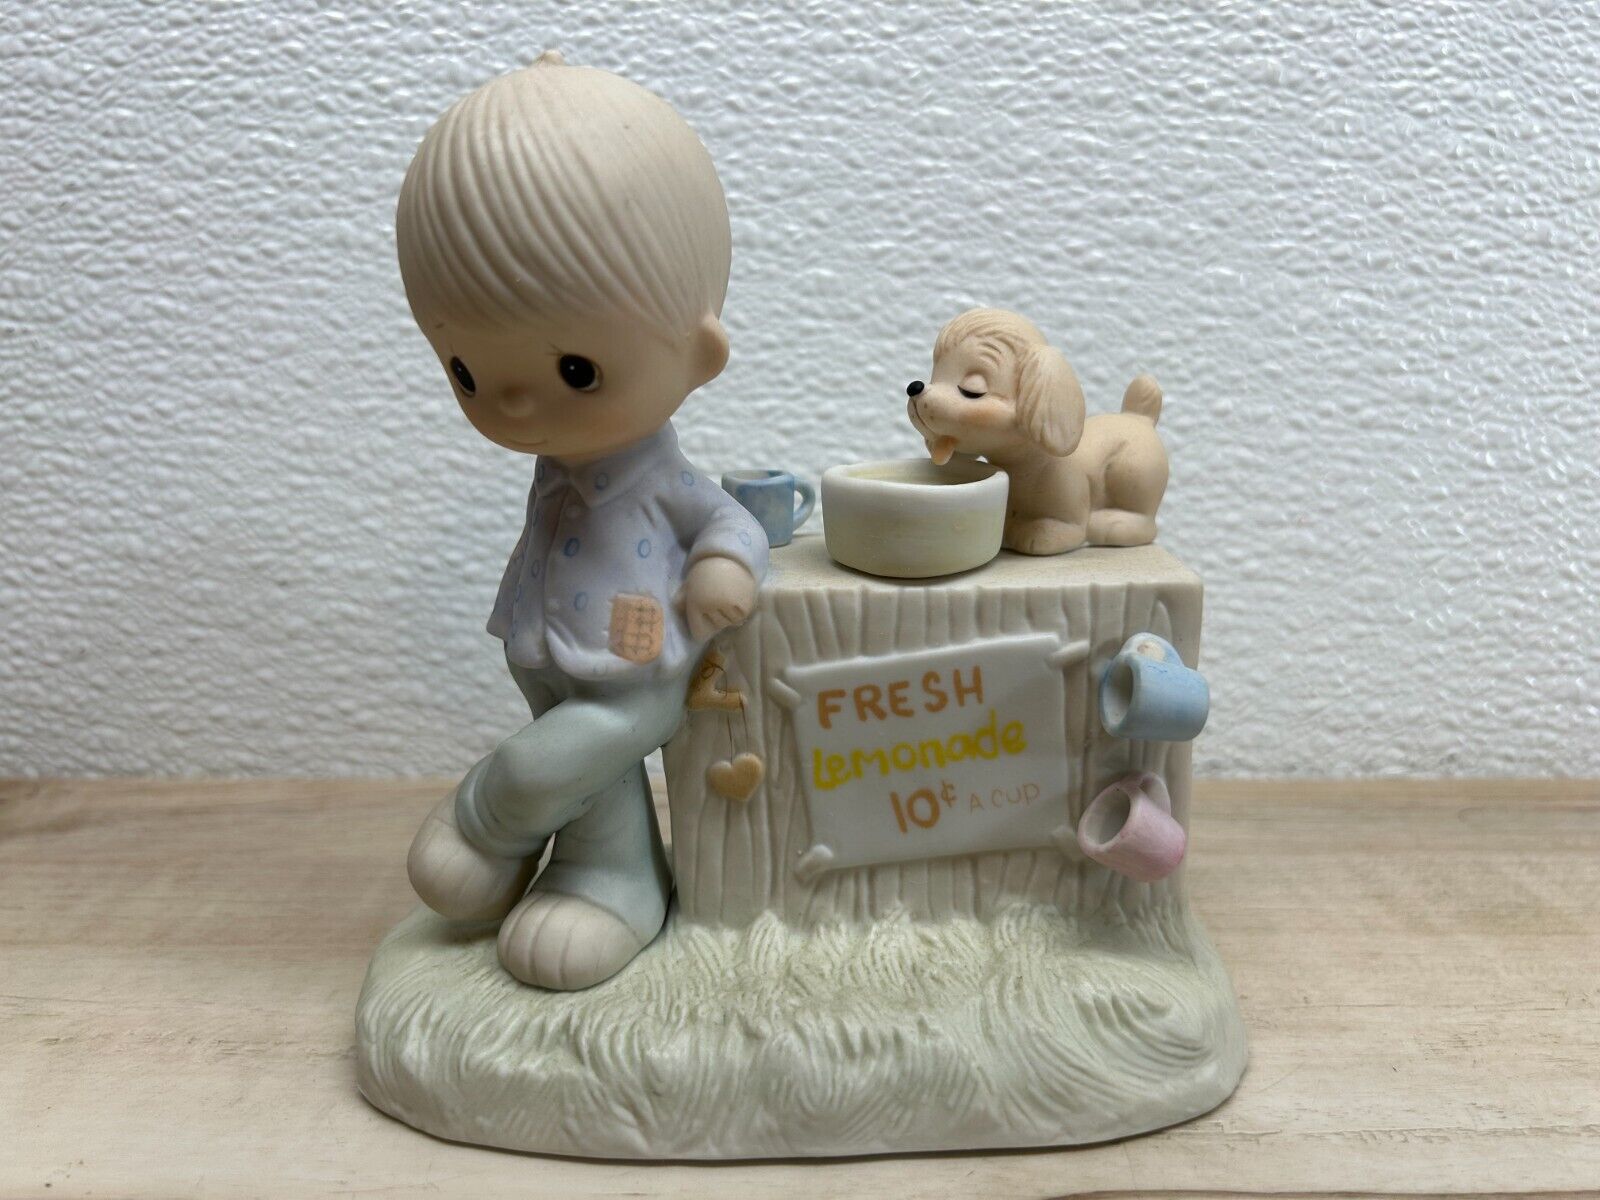 1980 Enesco Precious Moments Thank You For Comming To My Ade Porcelain Figurine